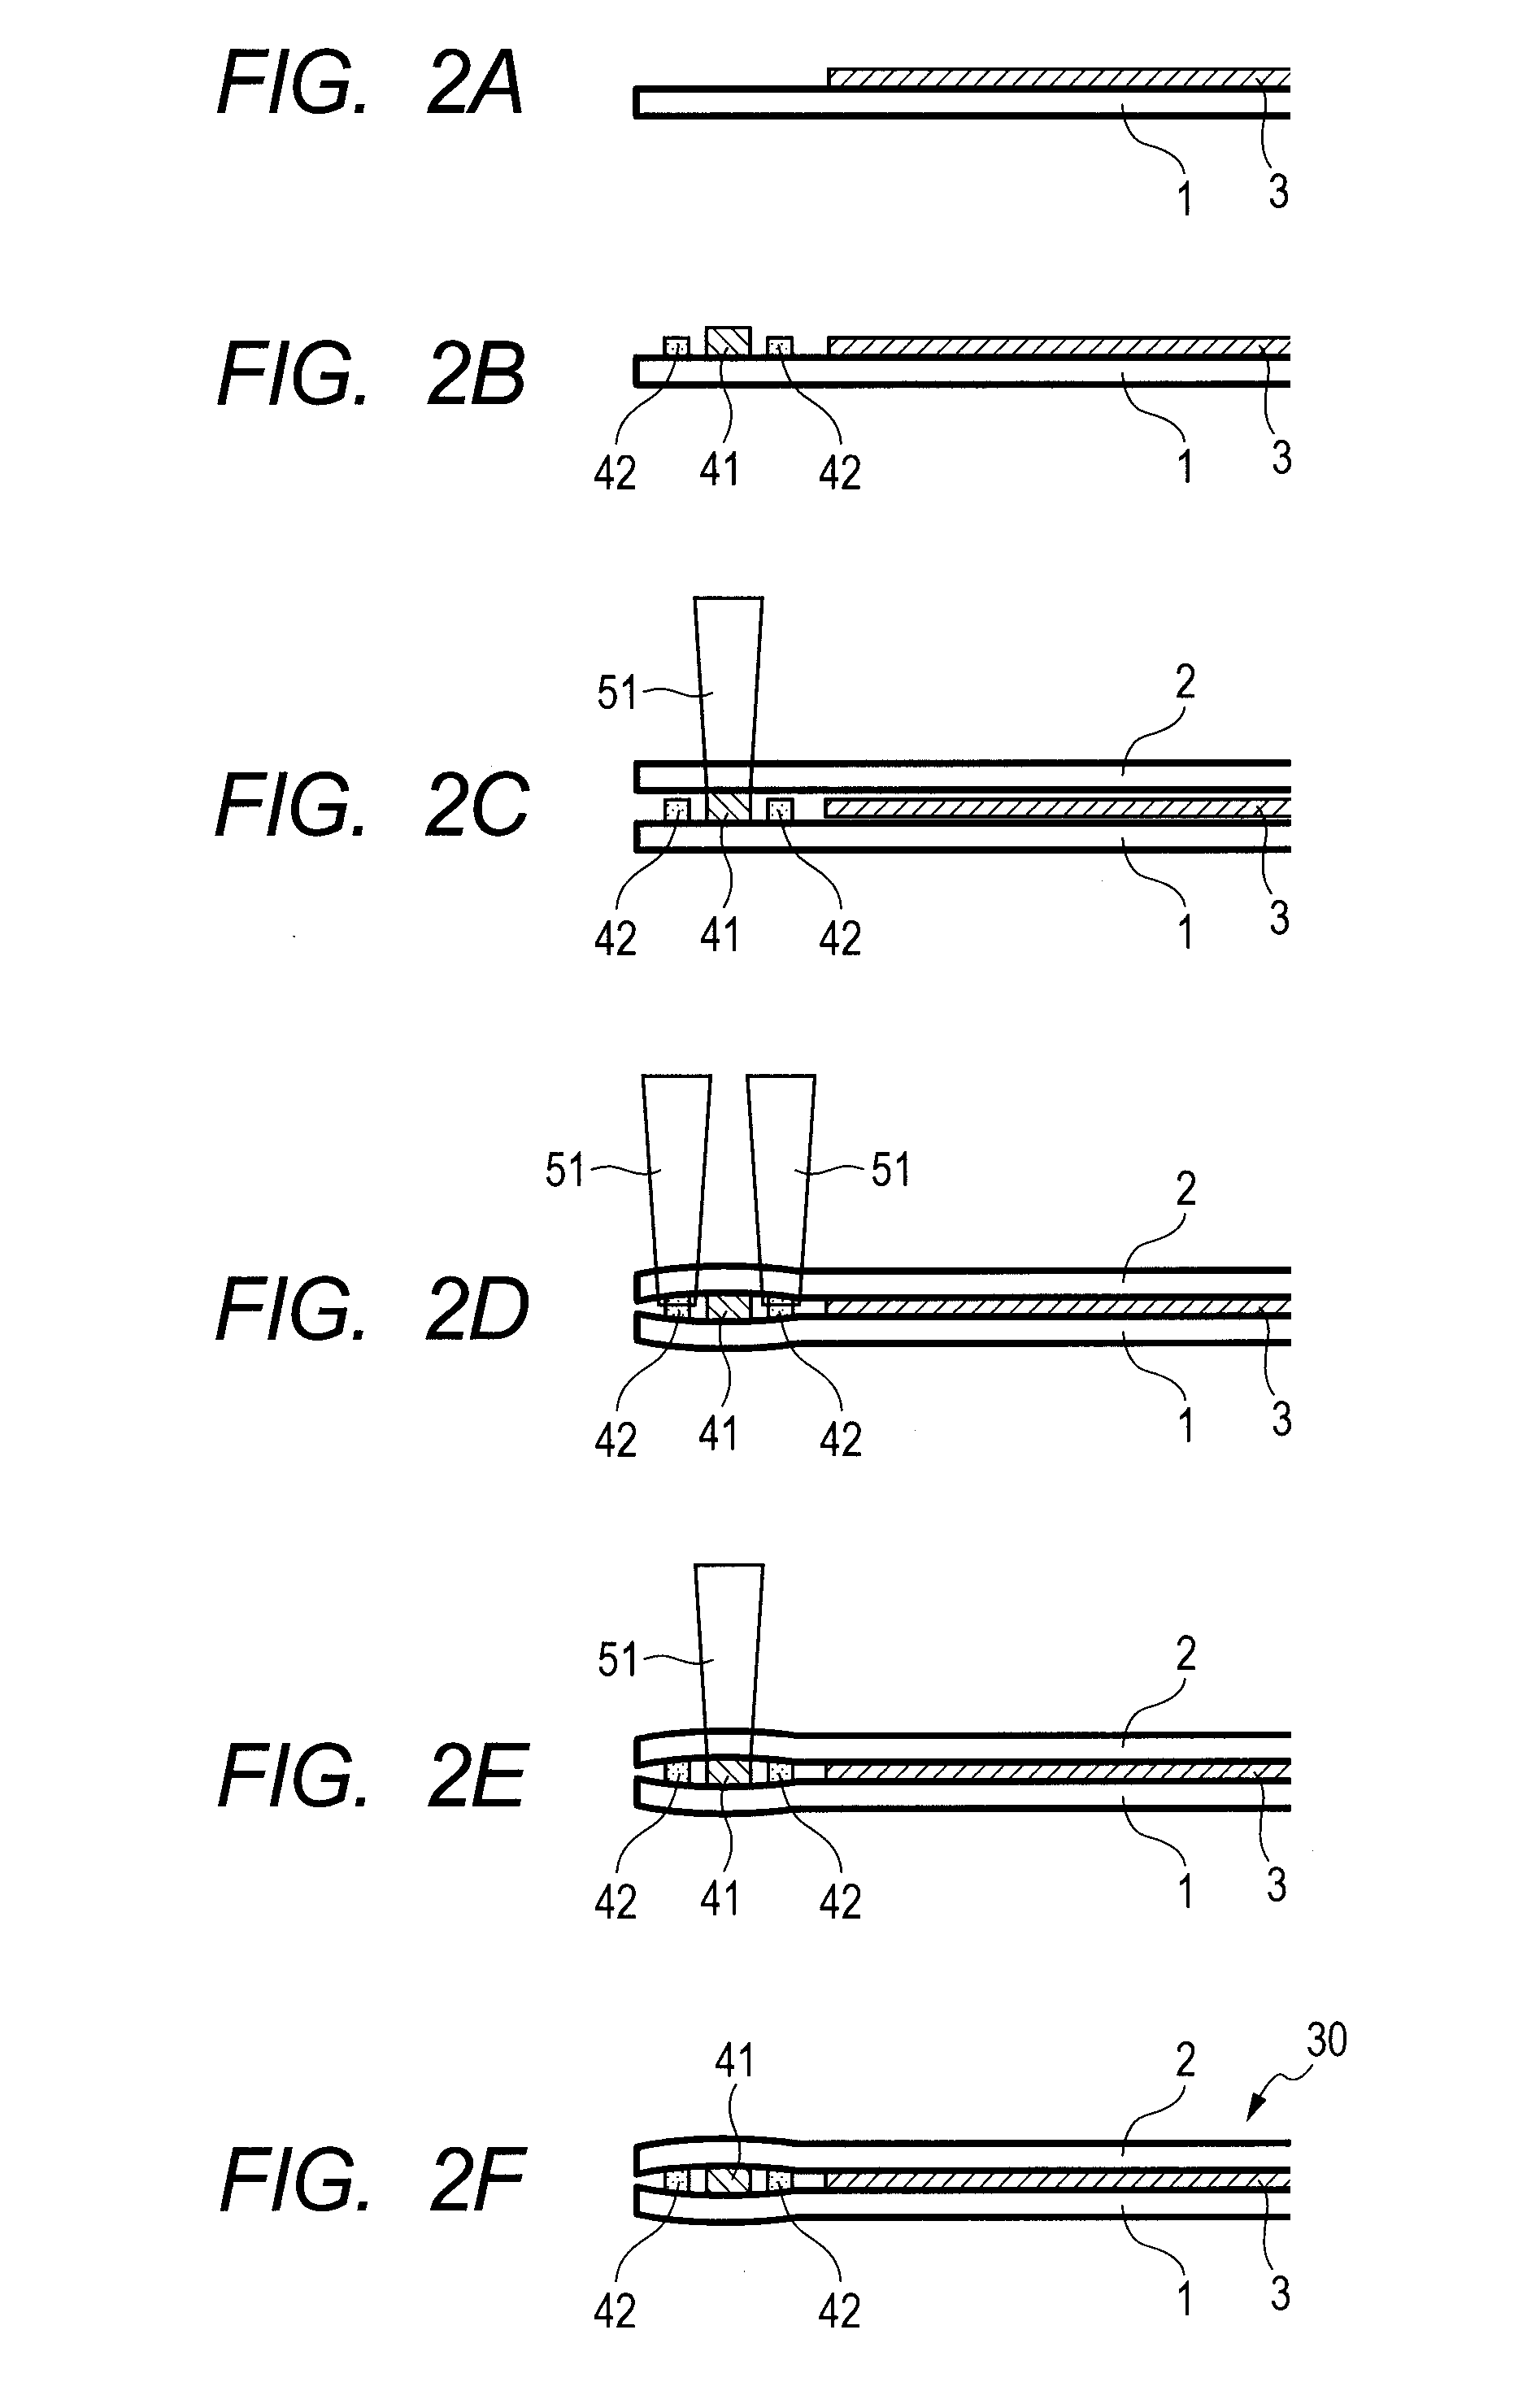 Hermetically sealed container, image display apparatus, and their manufacturing methods